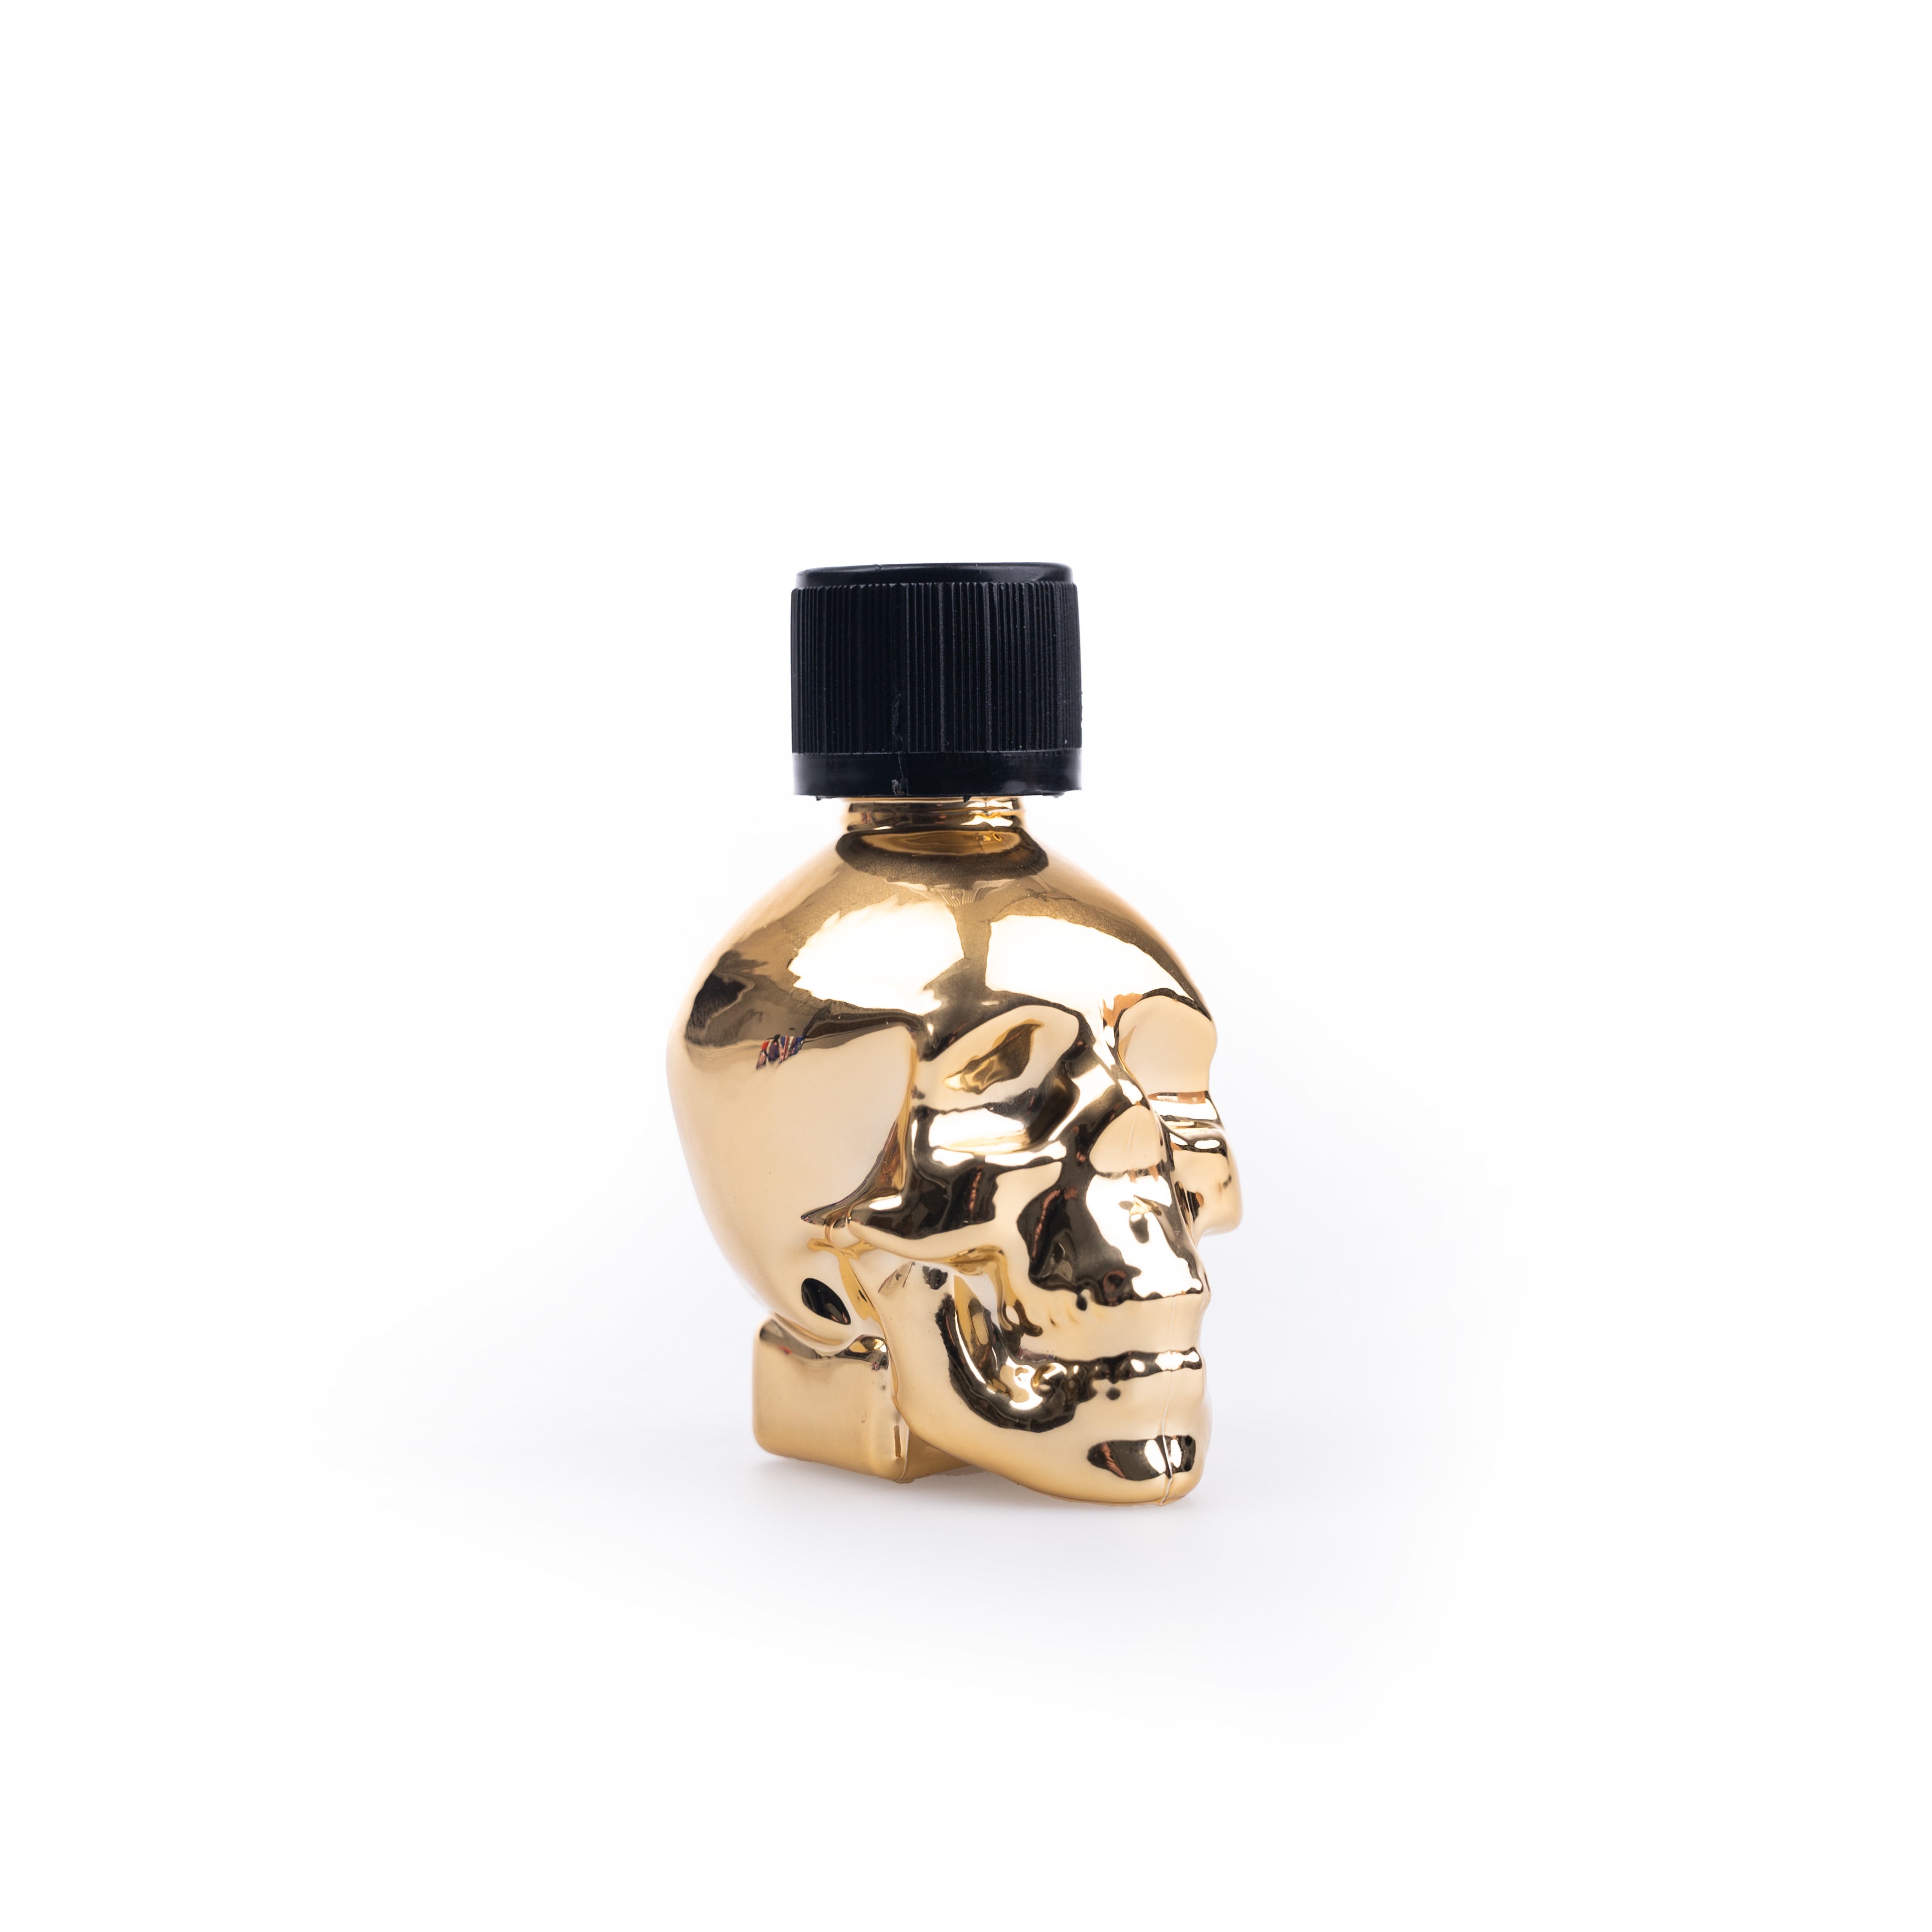 A product photo of Skull Fuck Gold Poppers.